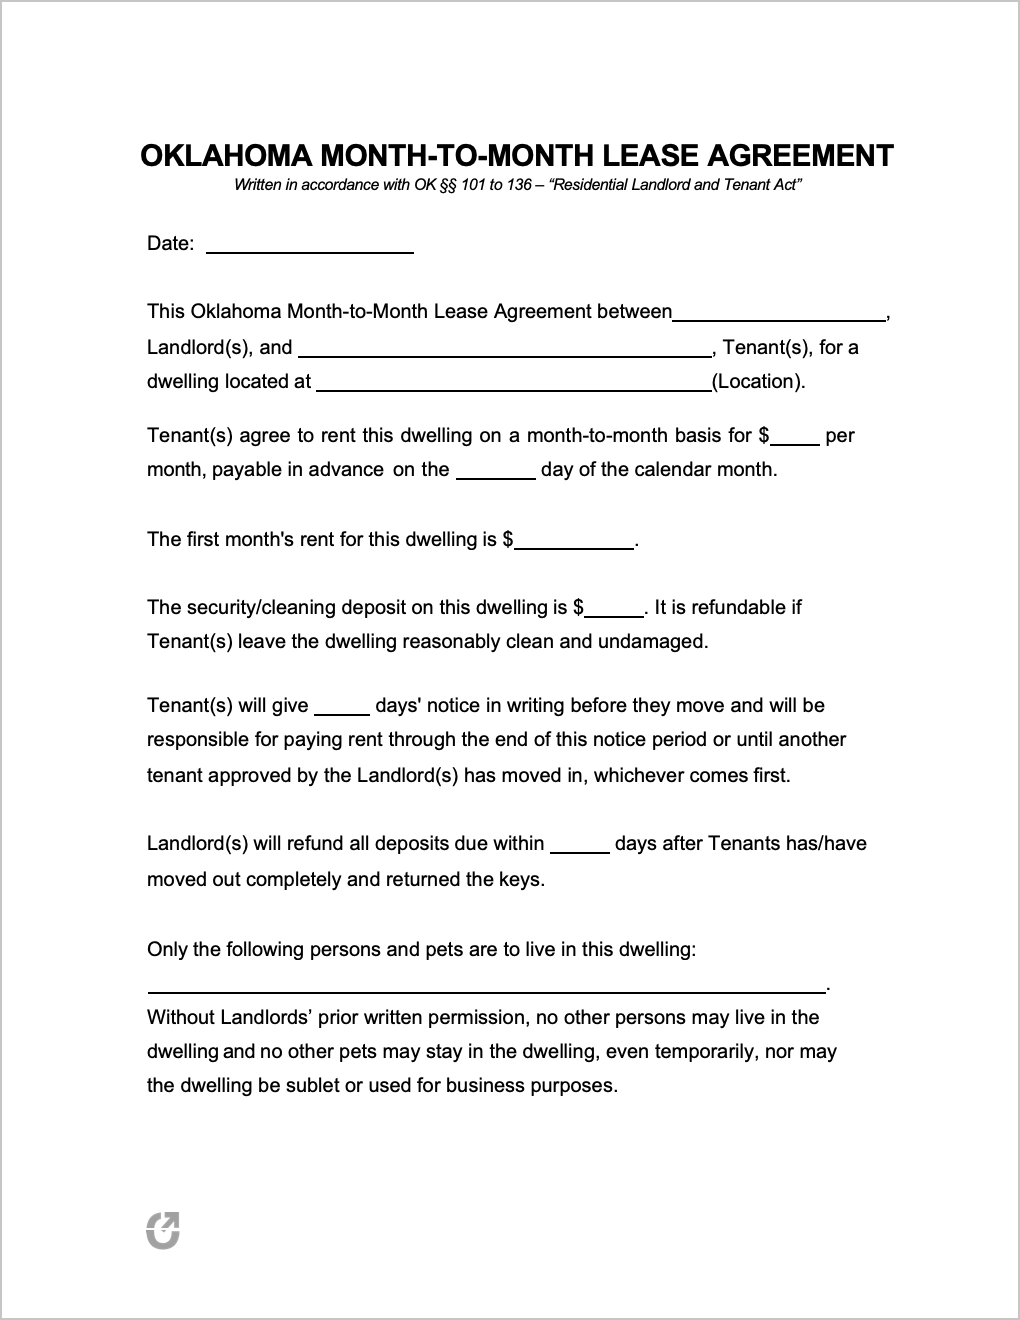 Free Oklahoma Month to Month Lease Agreement PDF WORD